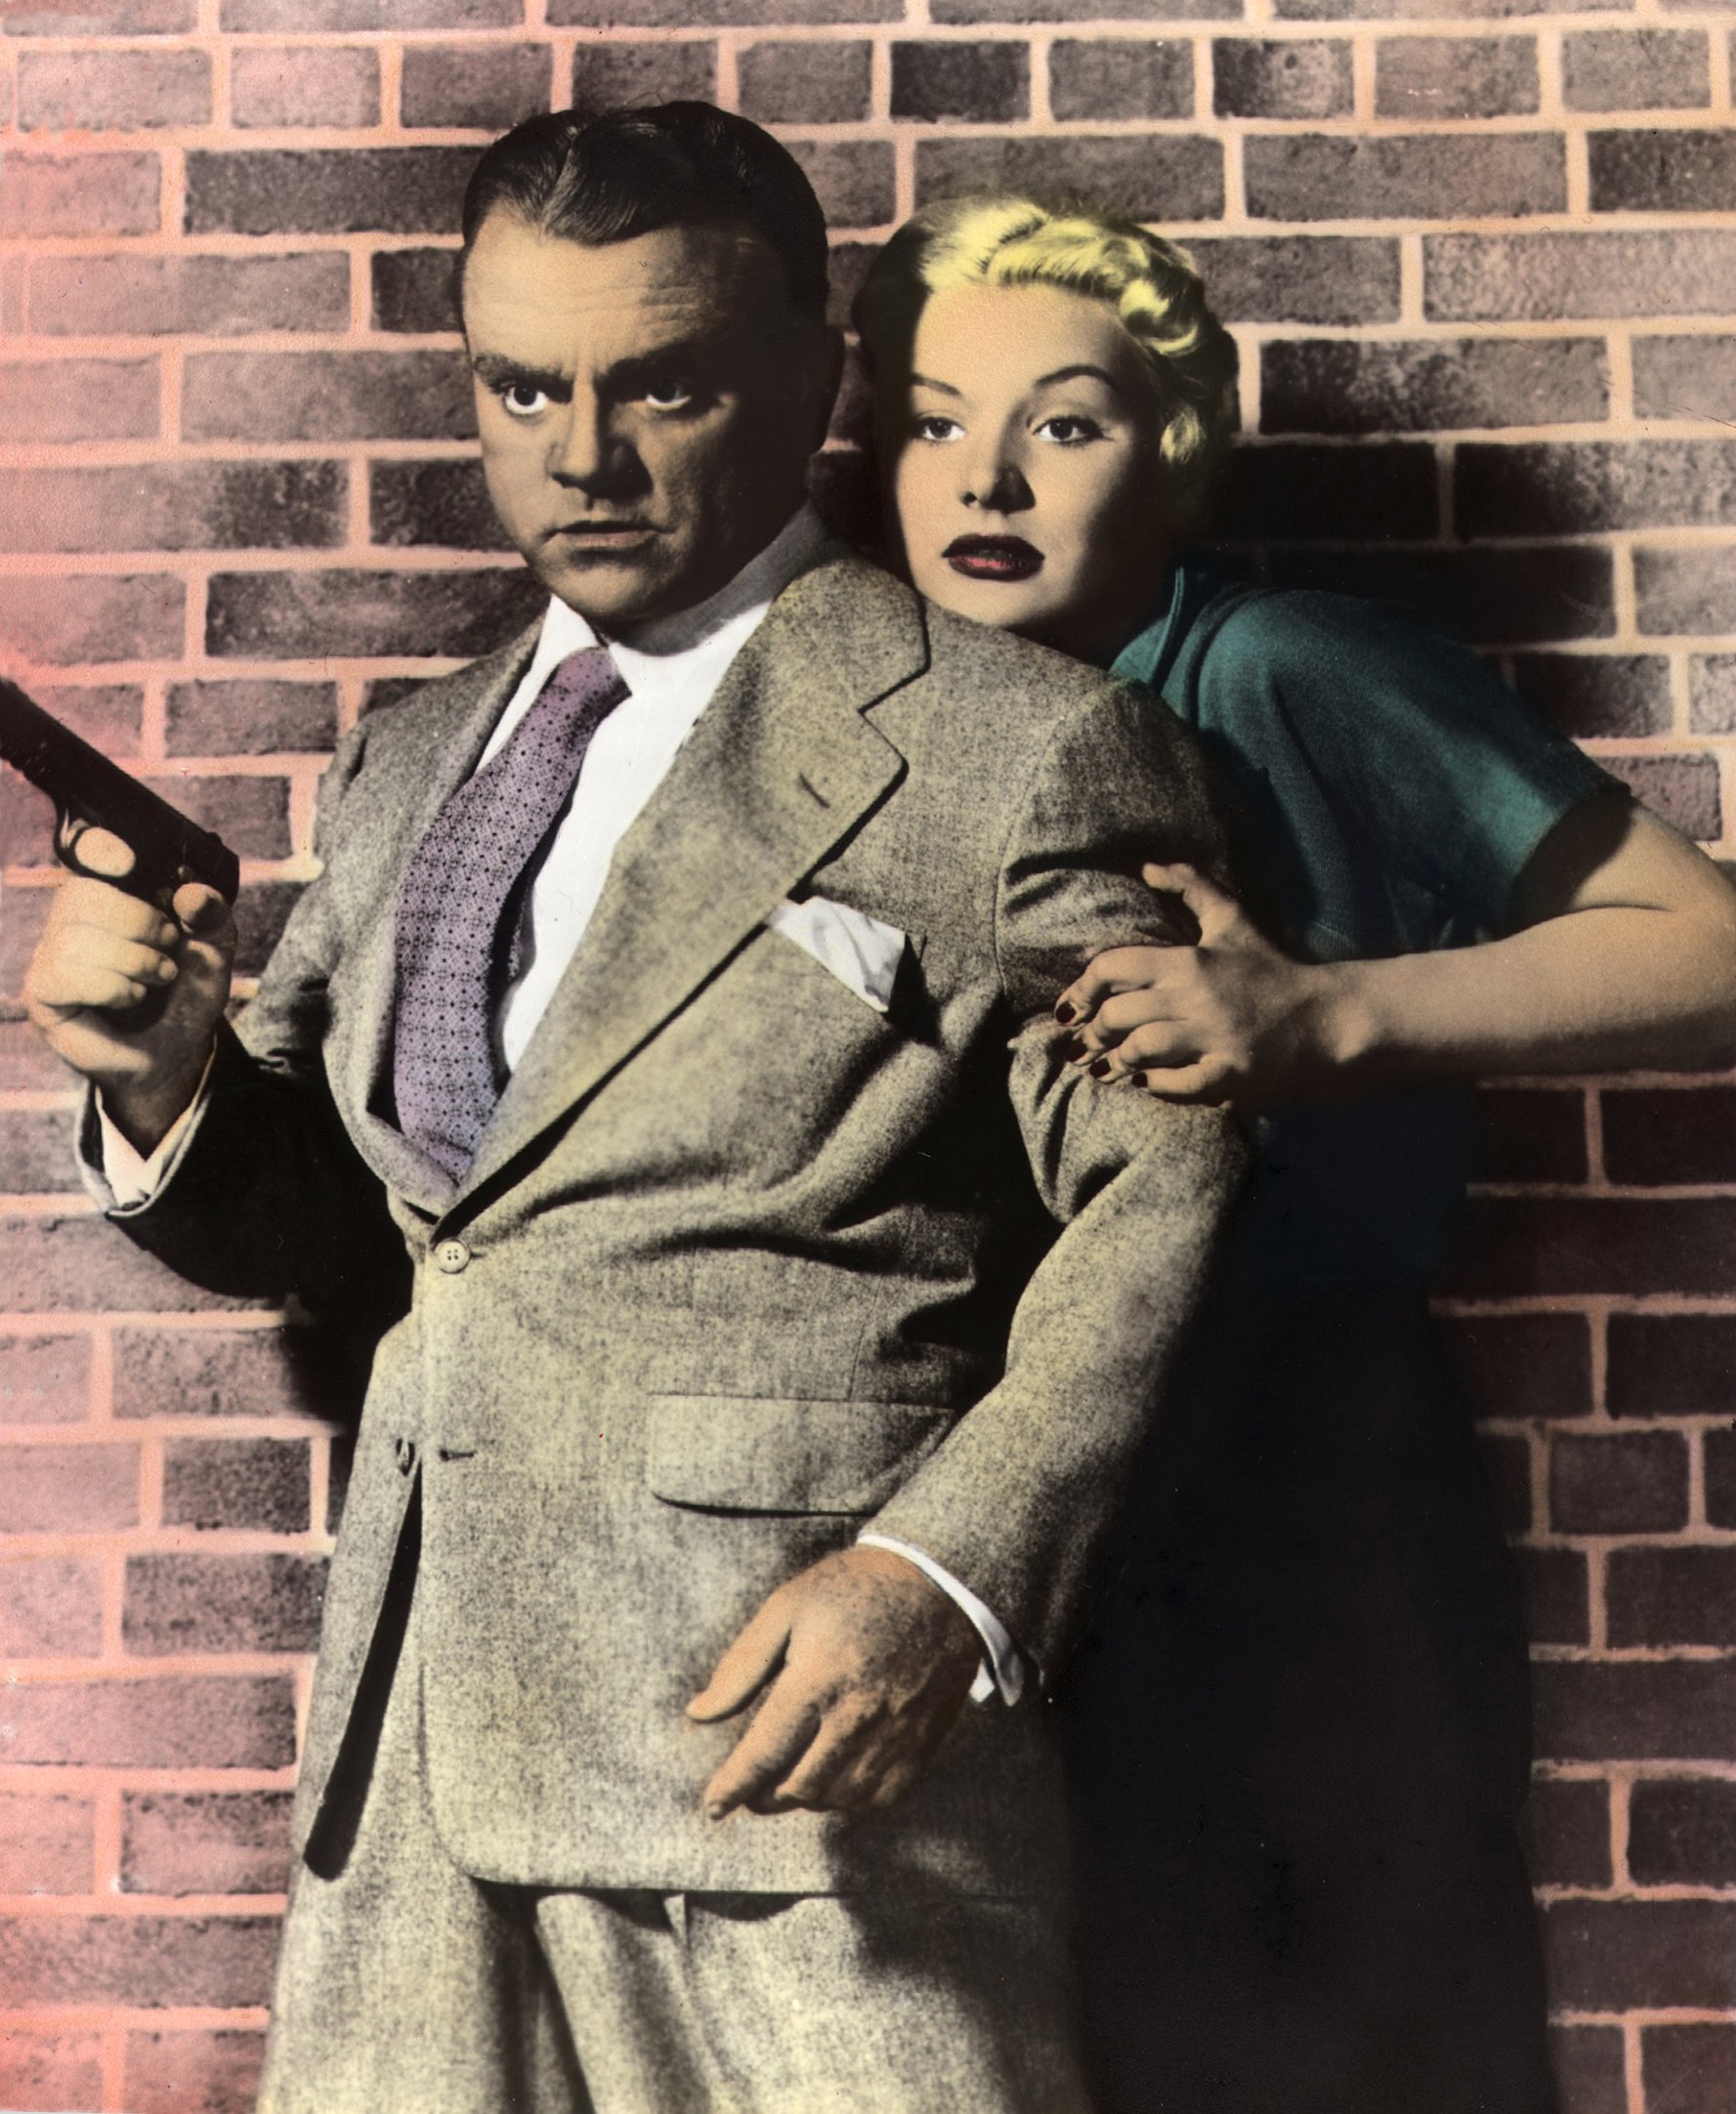 A sketch of a still from the movie "Kiss Tomorrow Goodbye" starring Barbara Payton and James Cagney, 1950. | Photo: Getty Images 